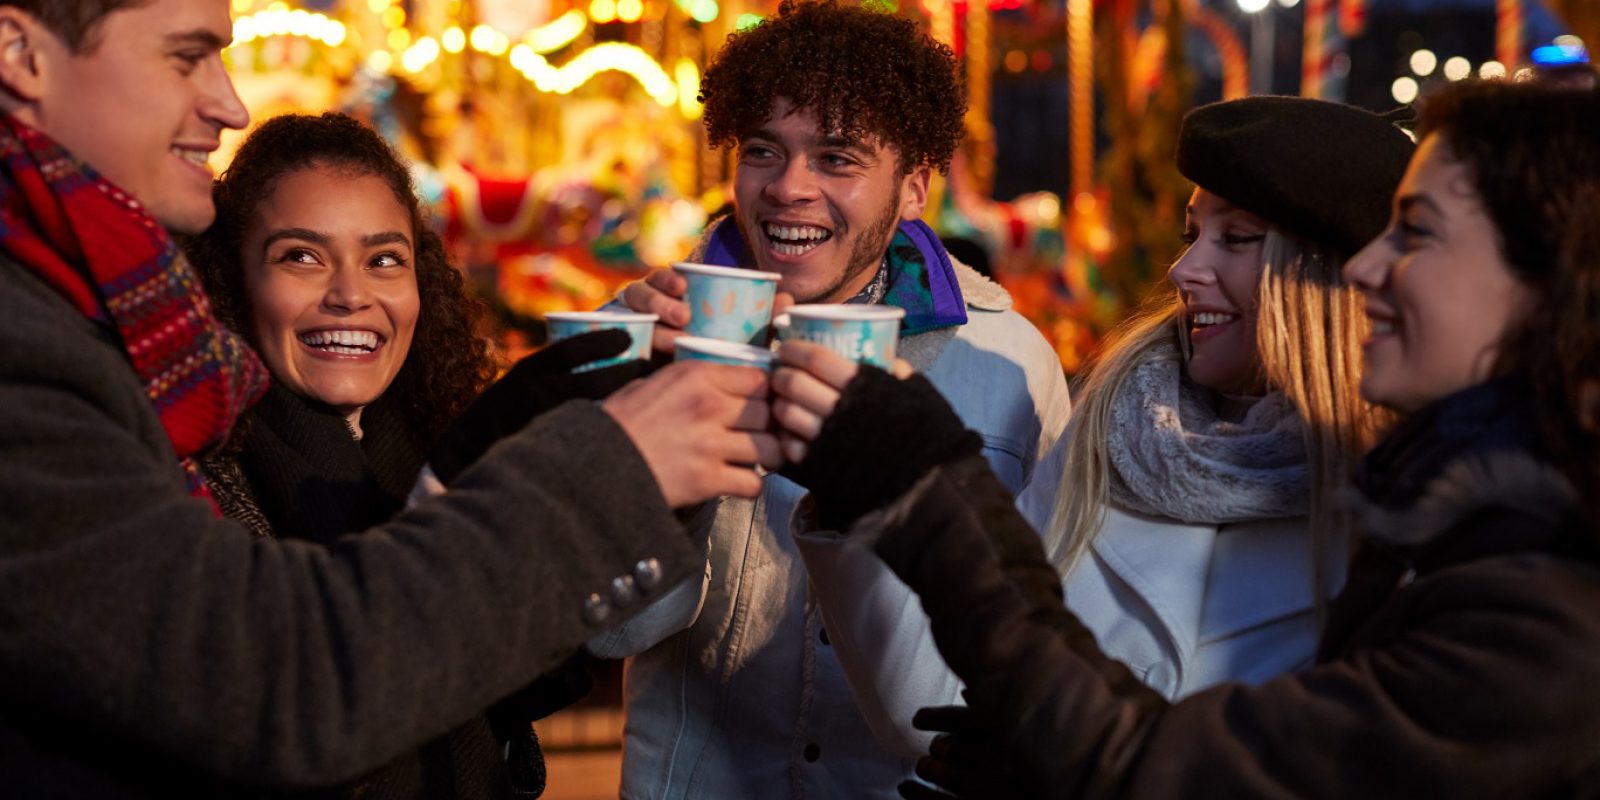 A group of friends enjoying a warm festive drink at a Christmas market